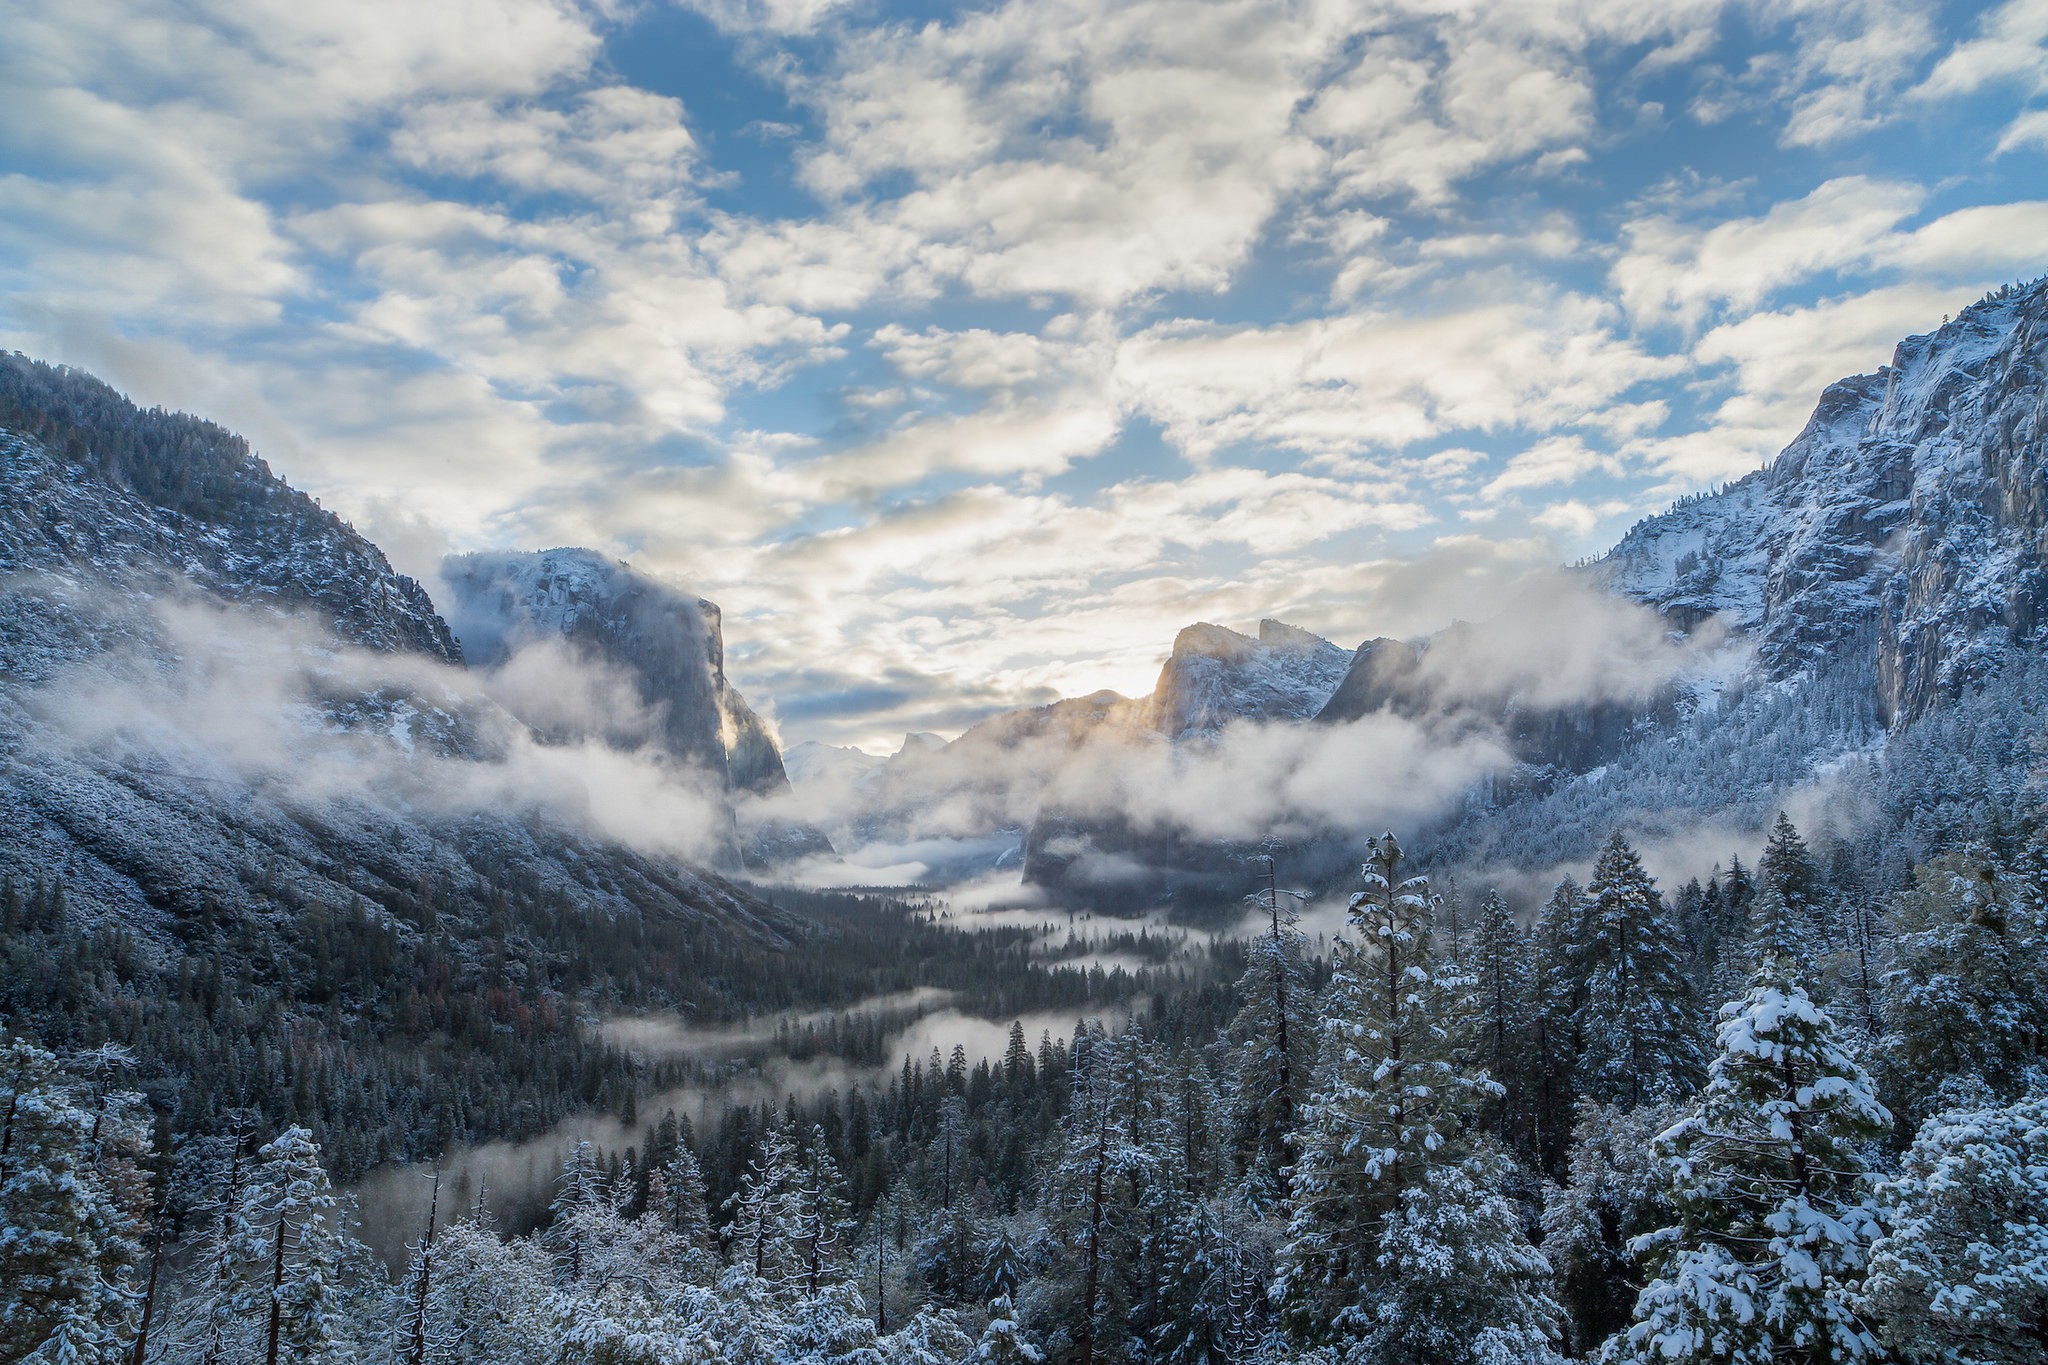 General 2048x1365 Yosemite National Park nature landscape USA winter cold ice snow outdoors sky clouds California